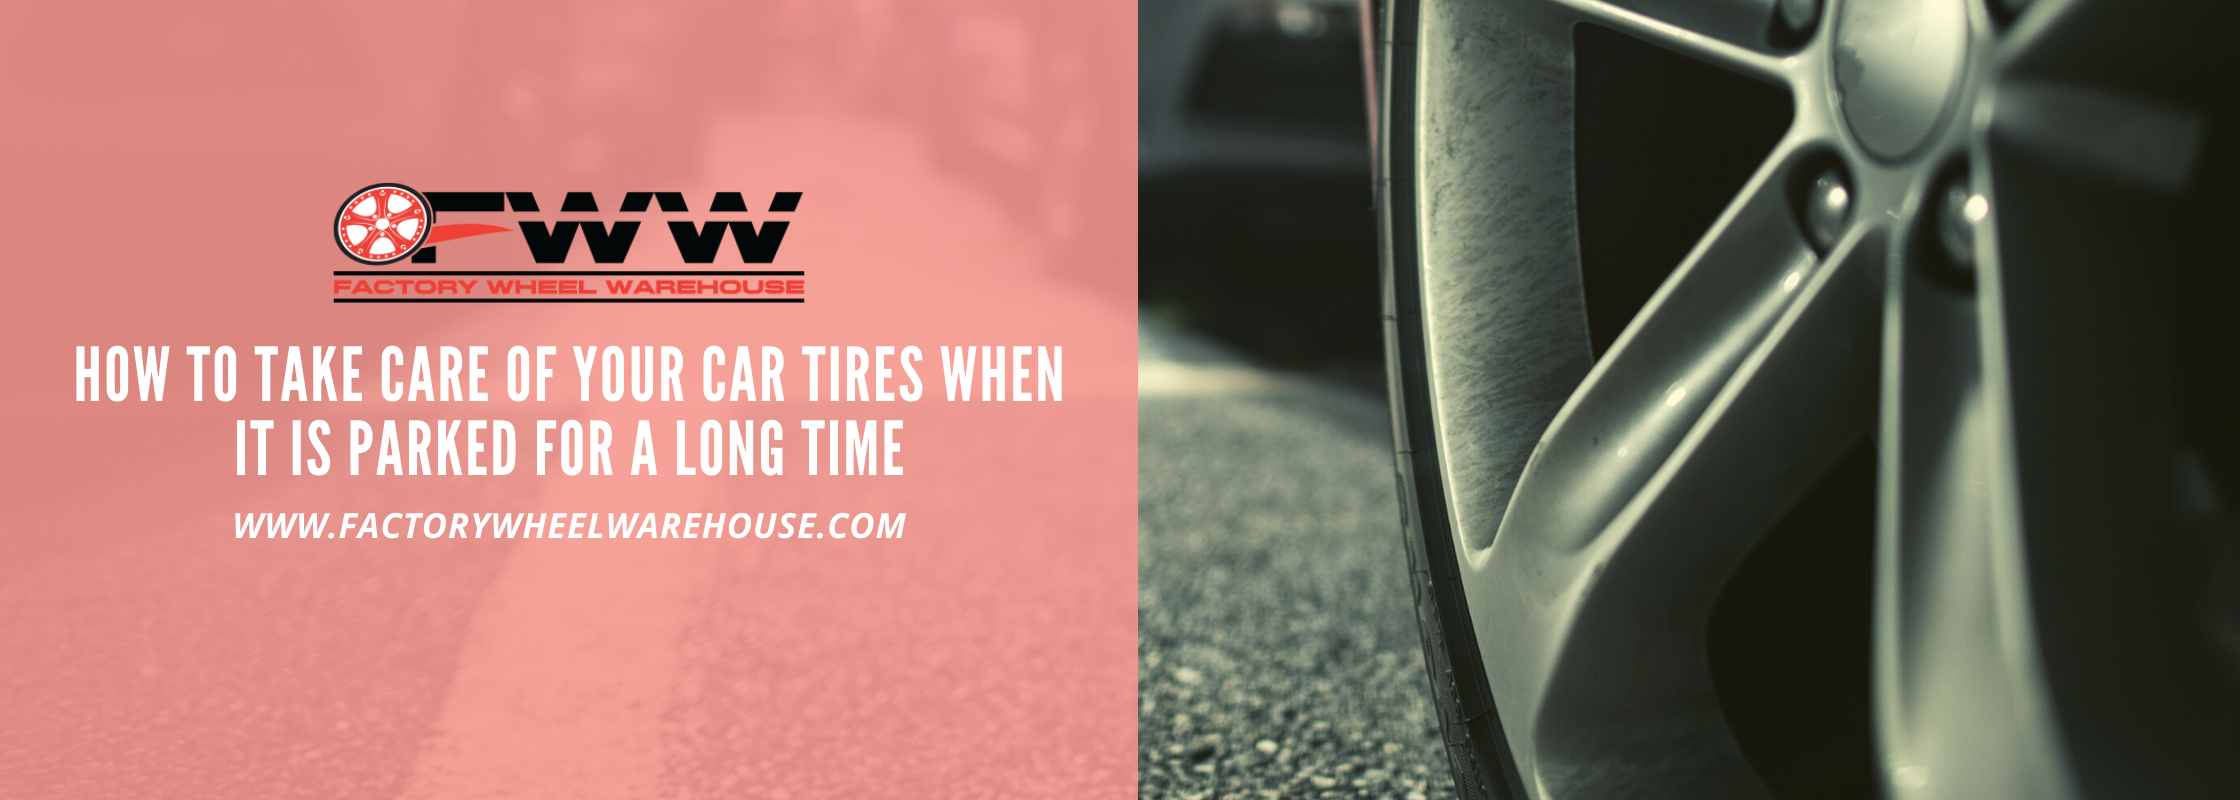 How to take care of your car tires when it is parked for a long time